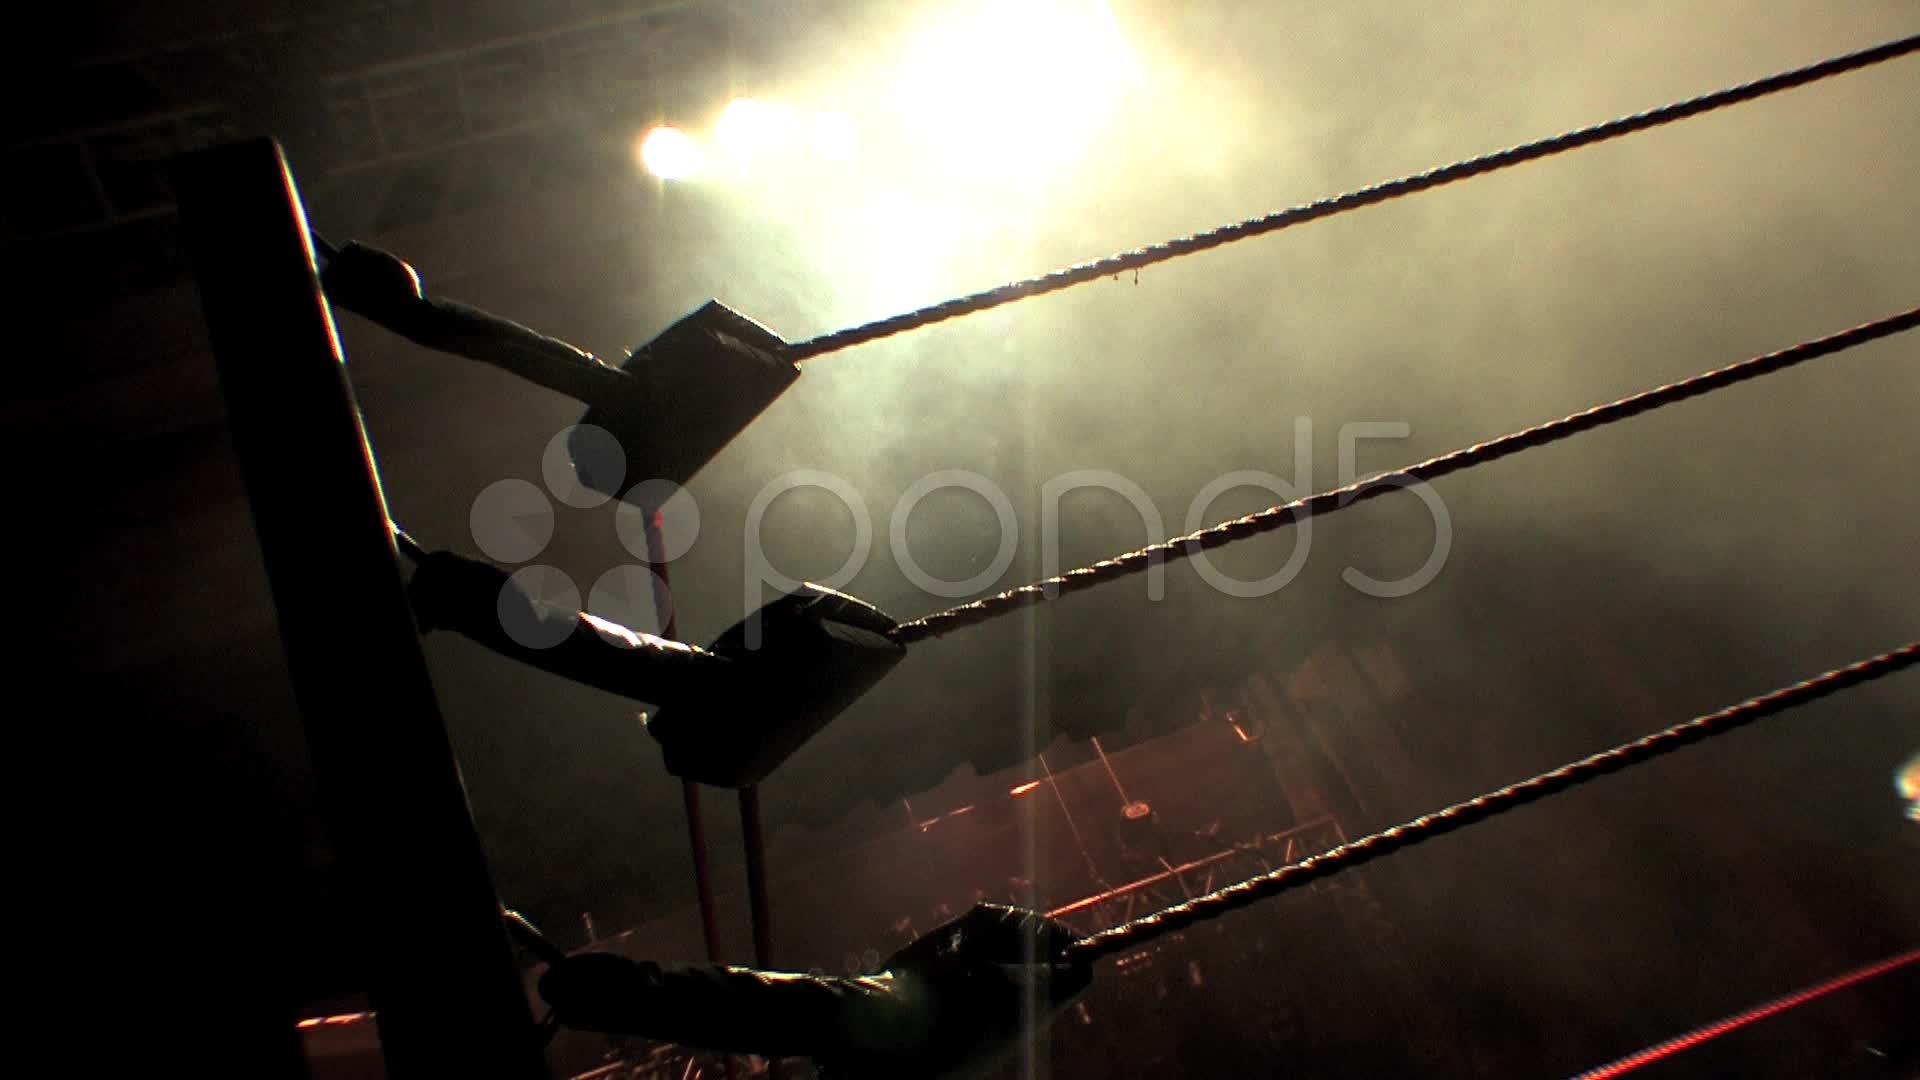 1920x1080 Collection of Wrestling Ring Widescreen Wallpapers: 6937068, 